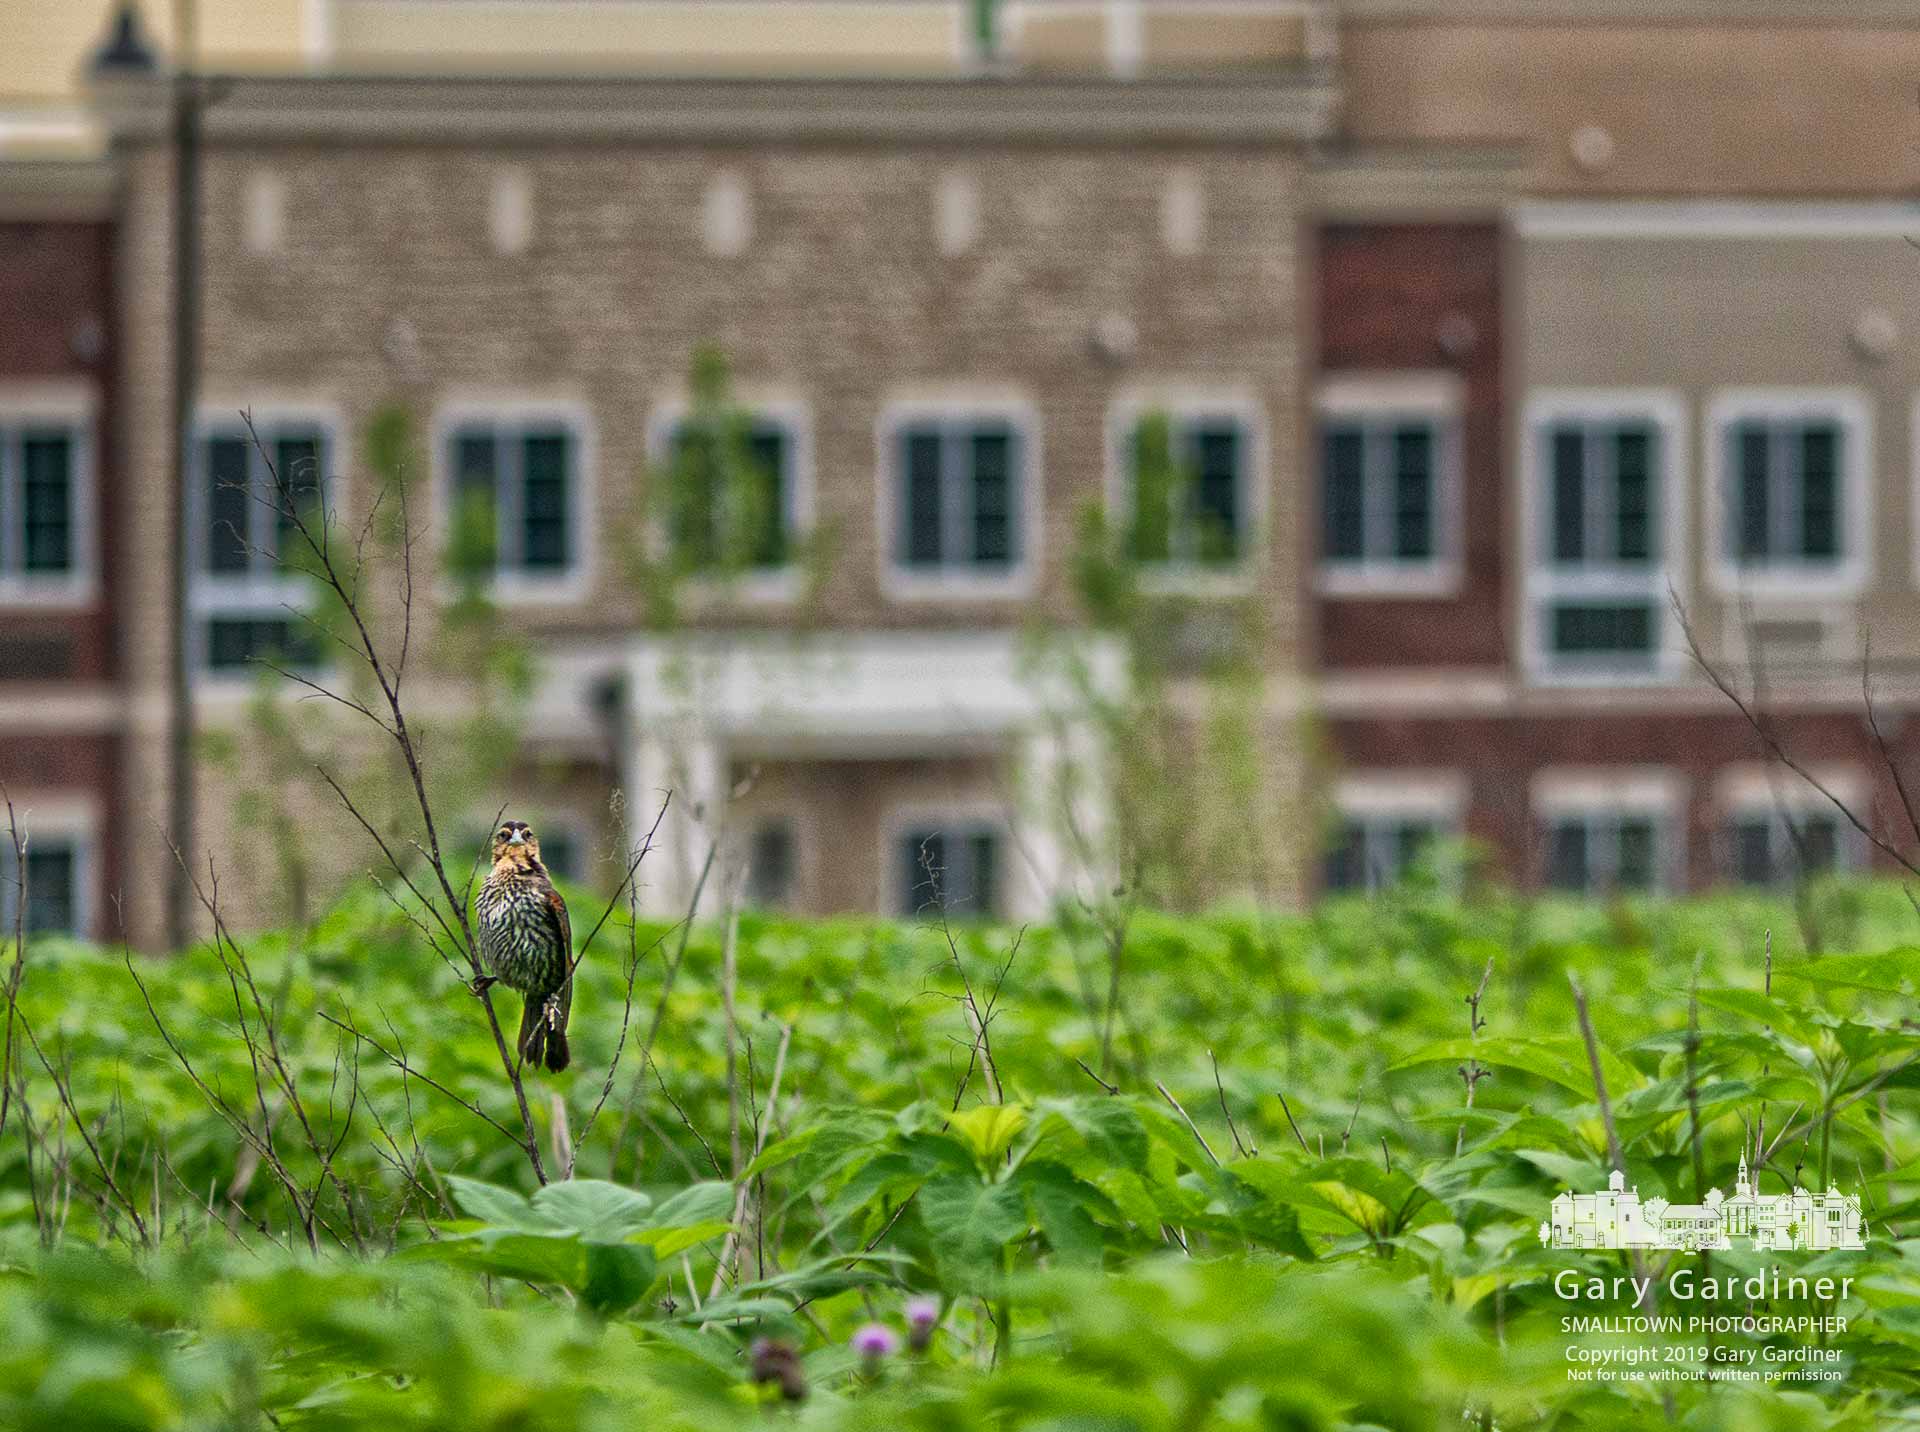 A juvenile Cooper's Hawk straddles a dried weed stalk on the edge of the unplowed field at the Braun Farm adjacent to construction for a senior living facility nearing completion. My Final Photo for June 17, 2019.